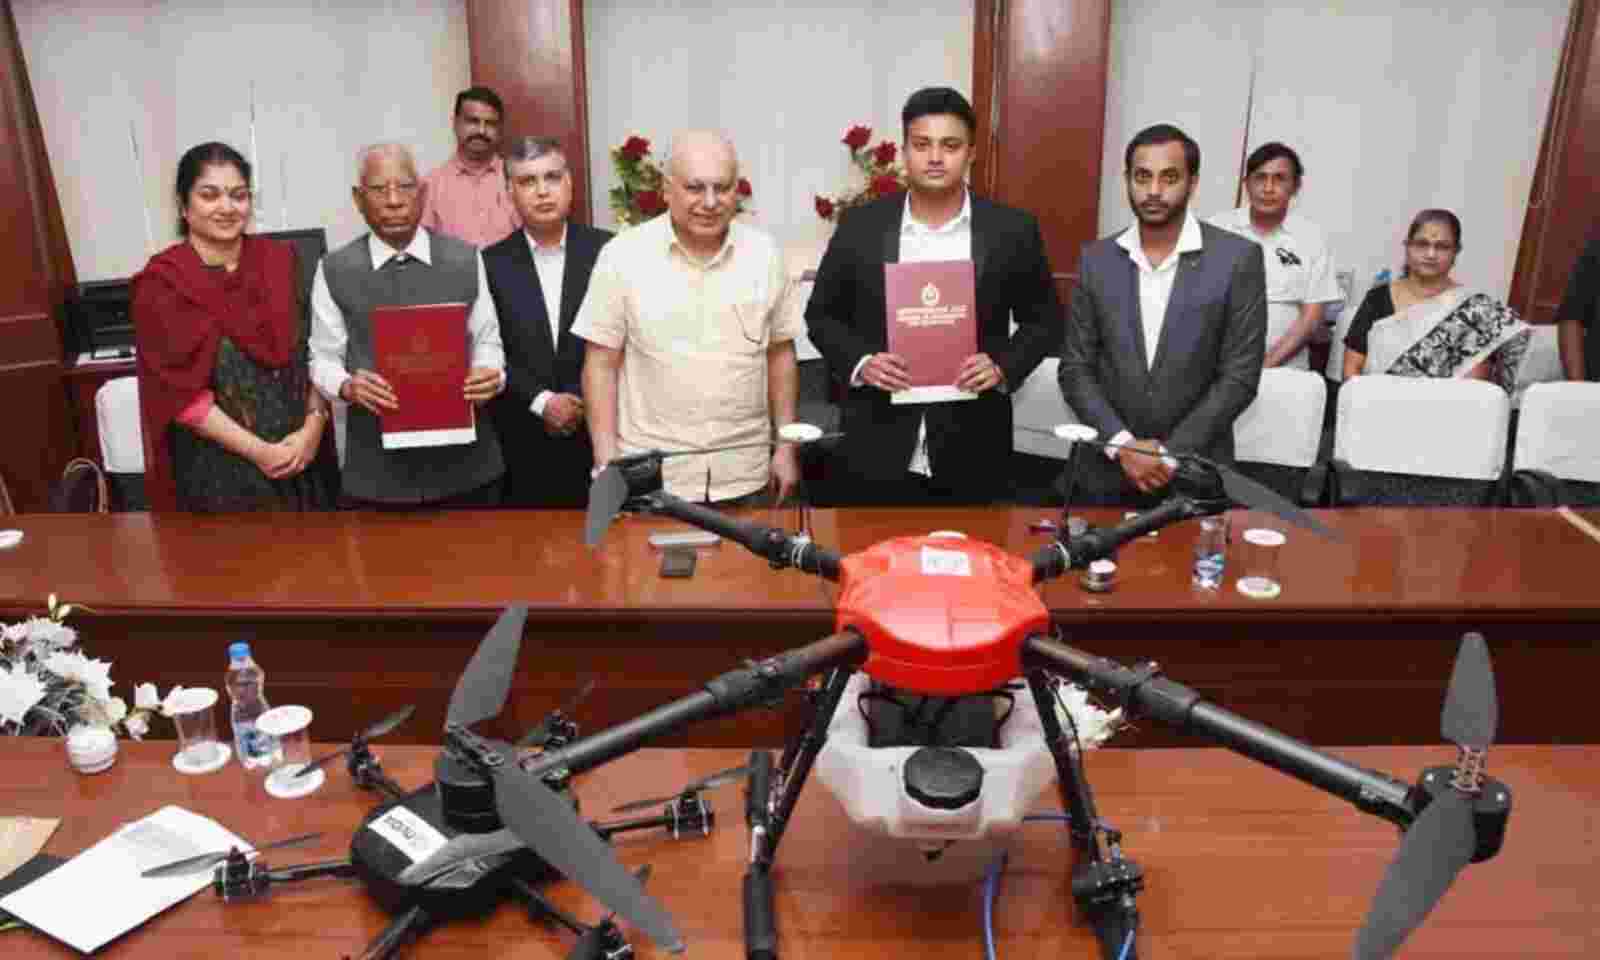 Elasticopter: Hyderabad researcher's 'breakthrough' drone can